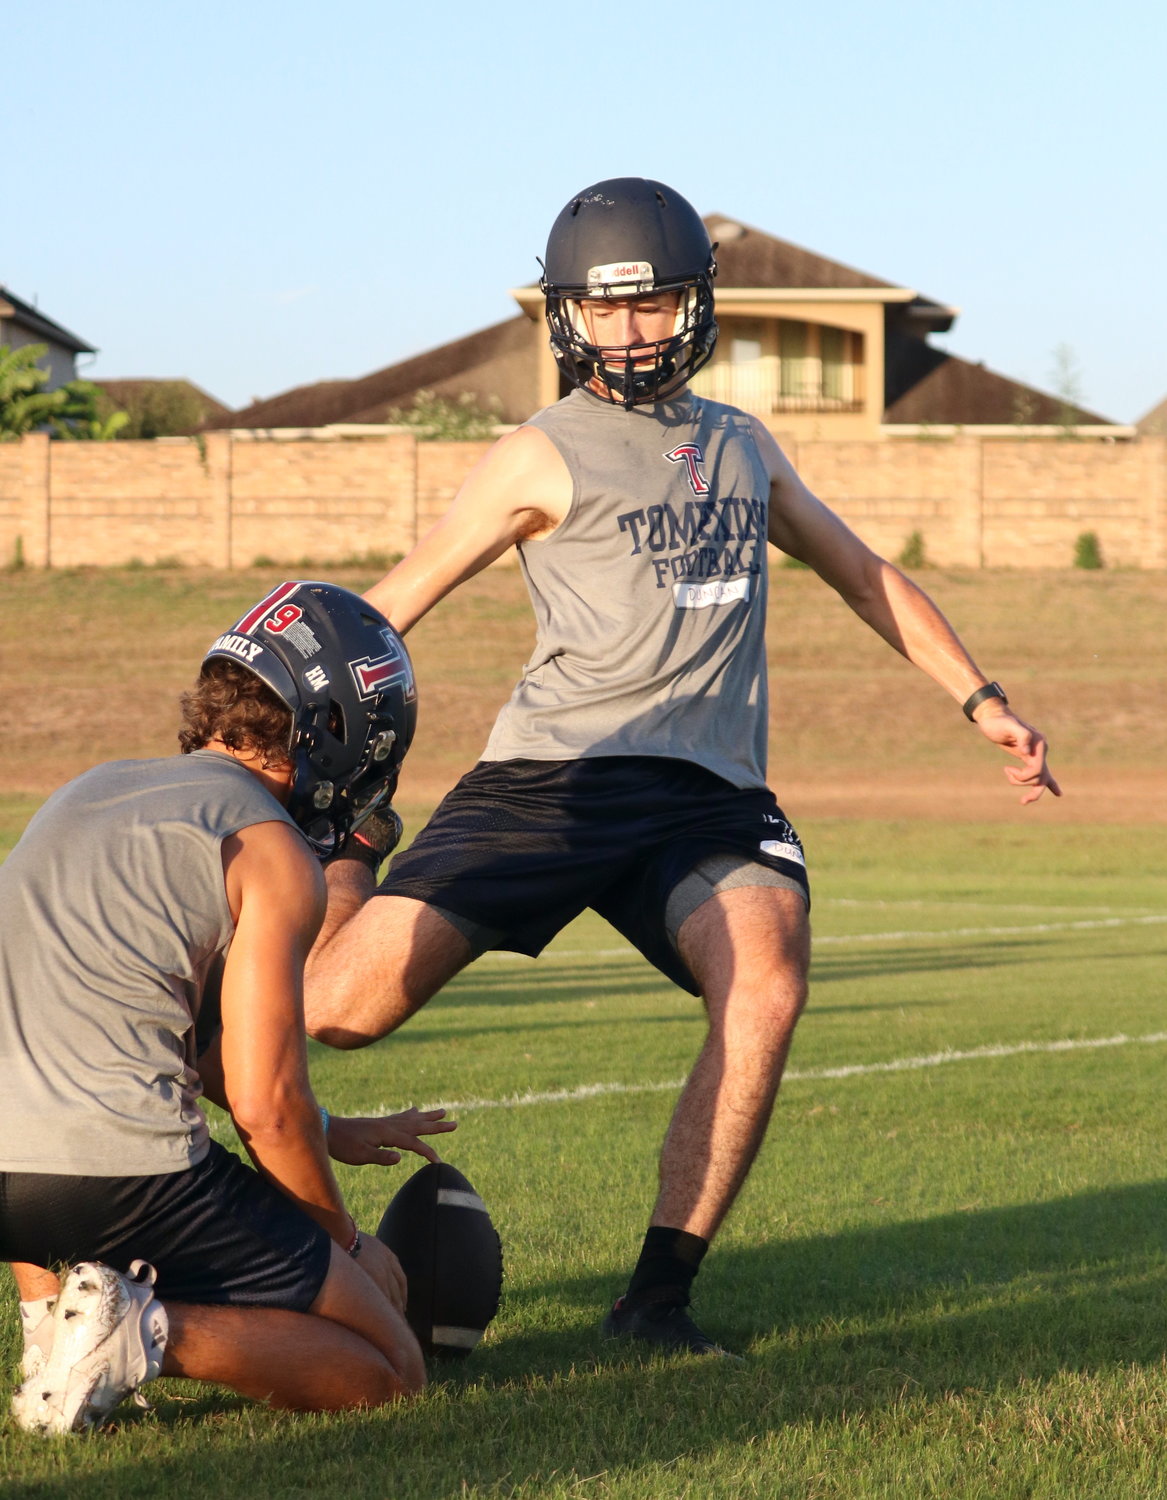 A Tompkins kicker kicks a ball through the uprights during Tuesday’s practice.